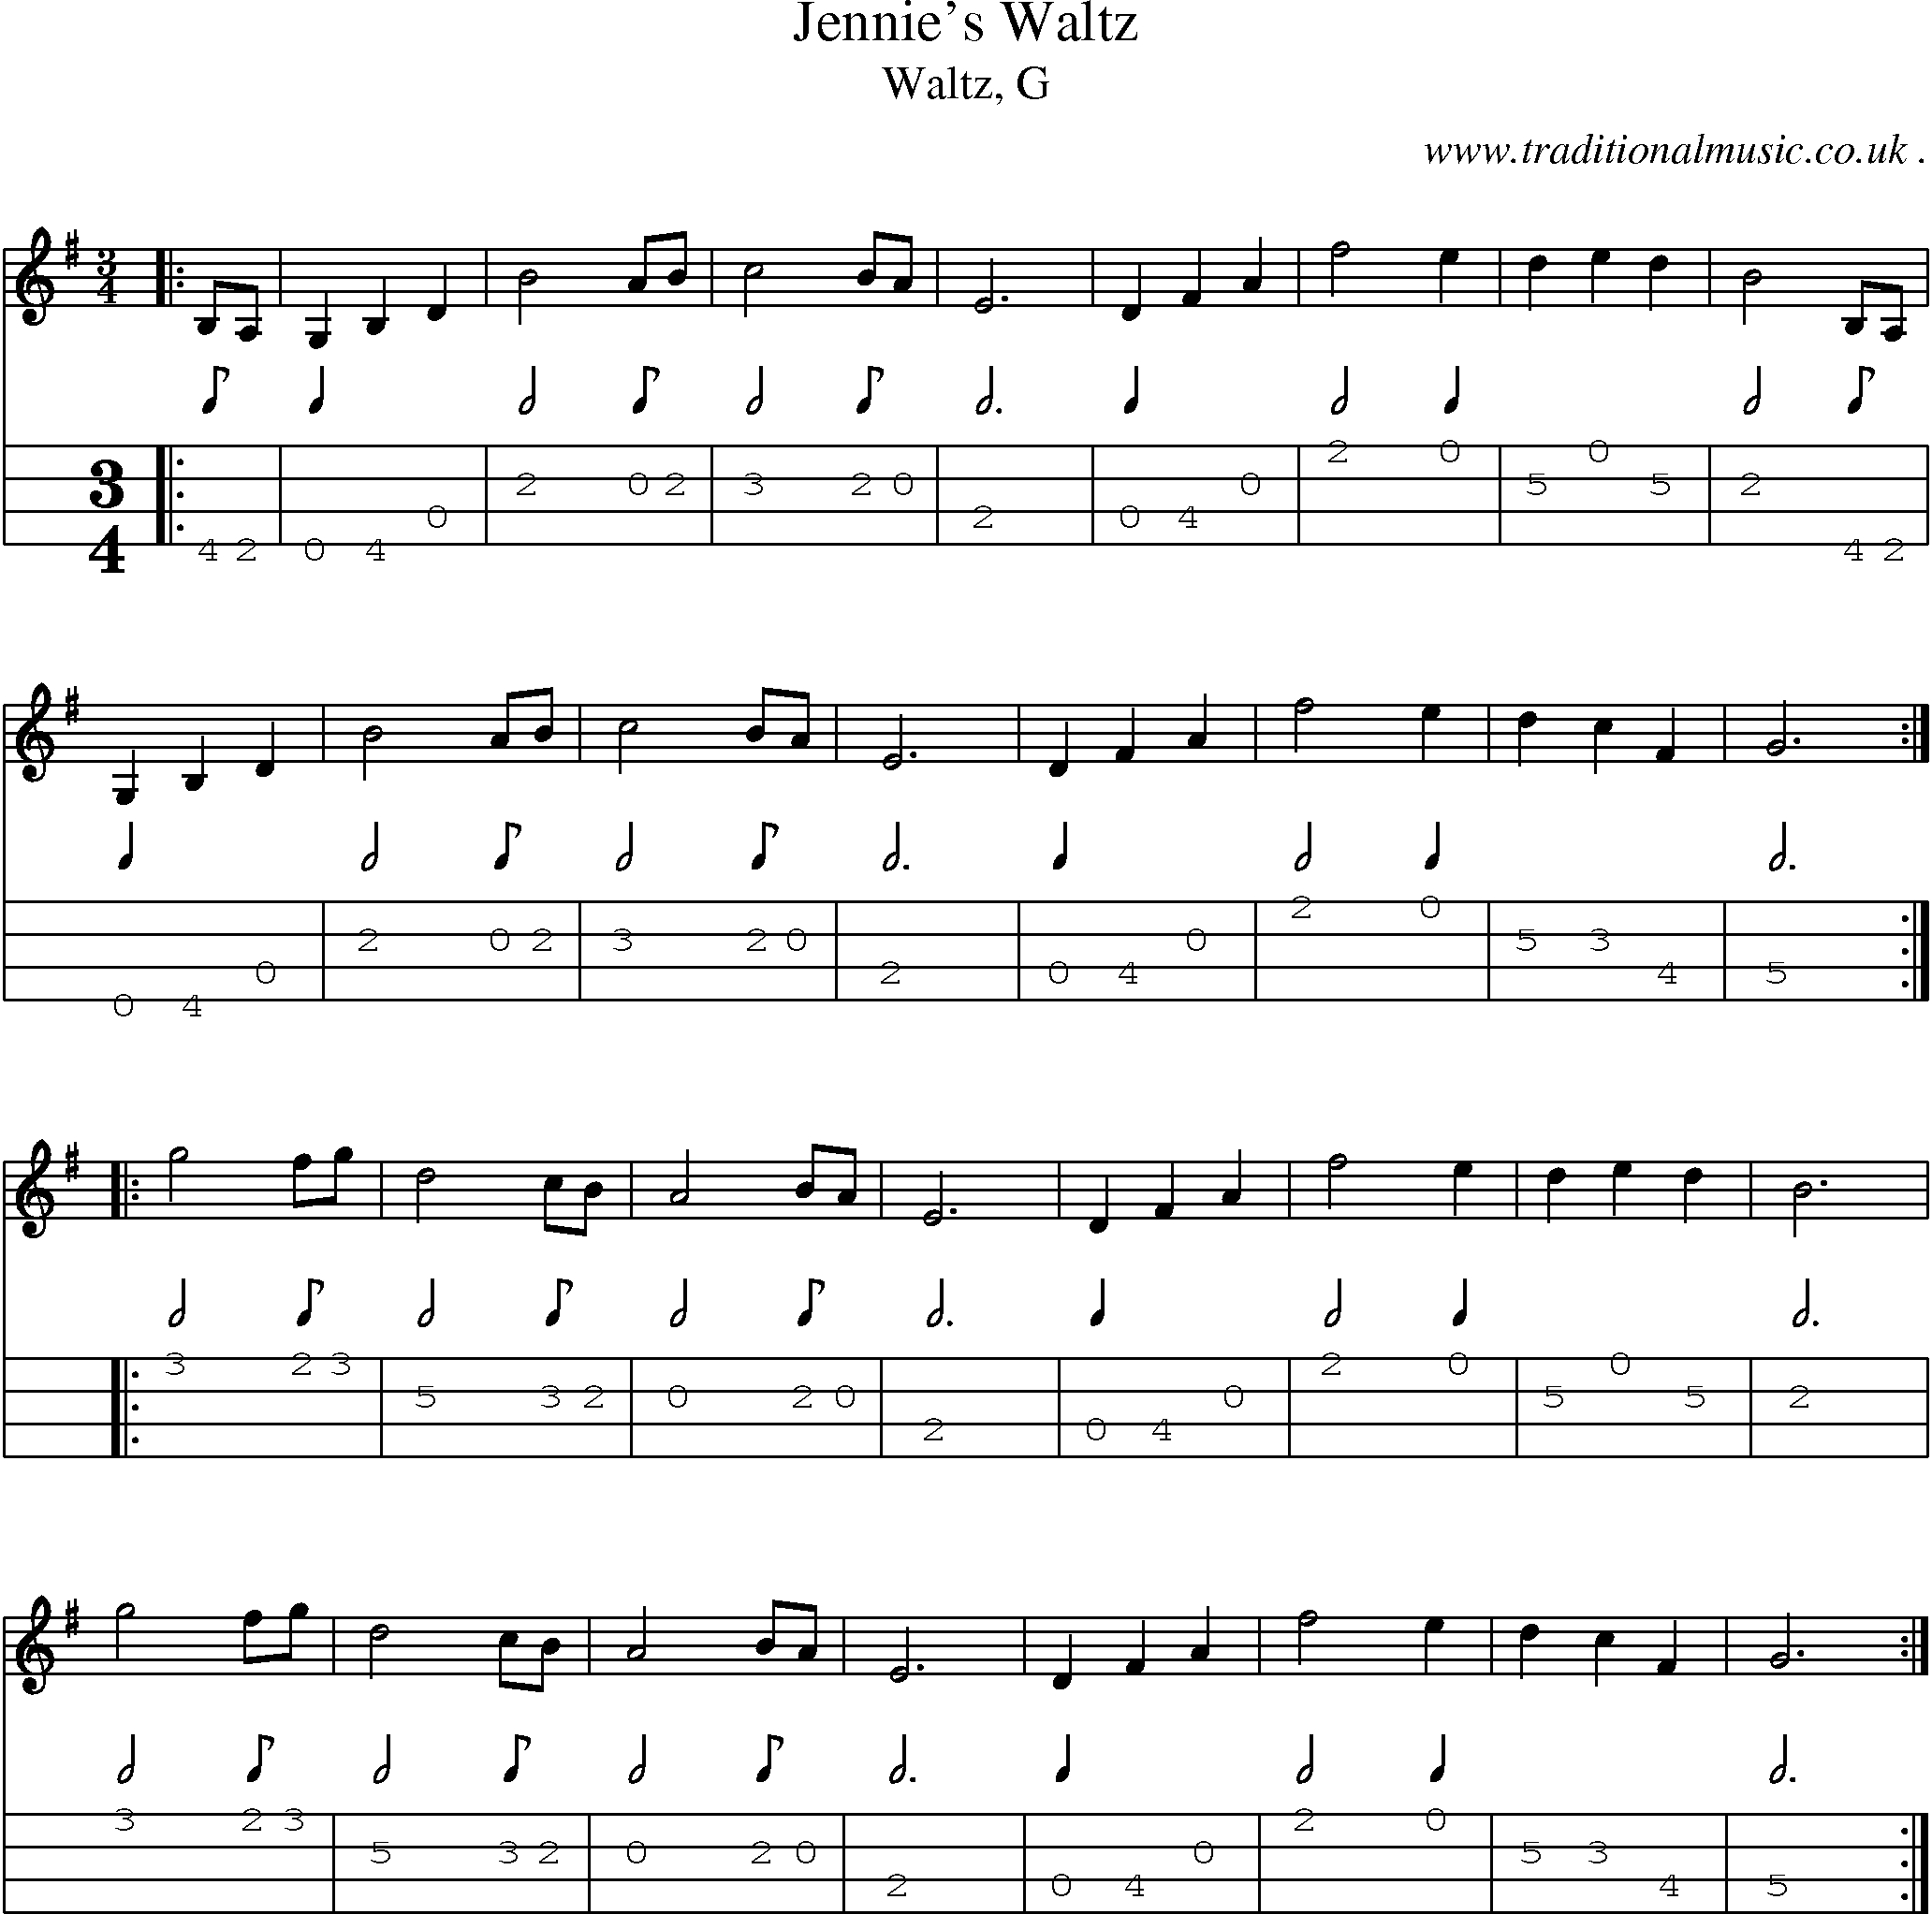 Sheet-music  score, Chords and Mandolin Tabs for Jennies Waltz